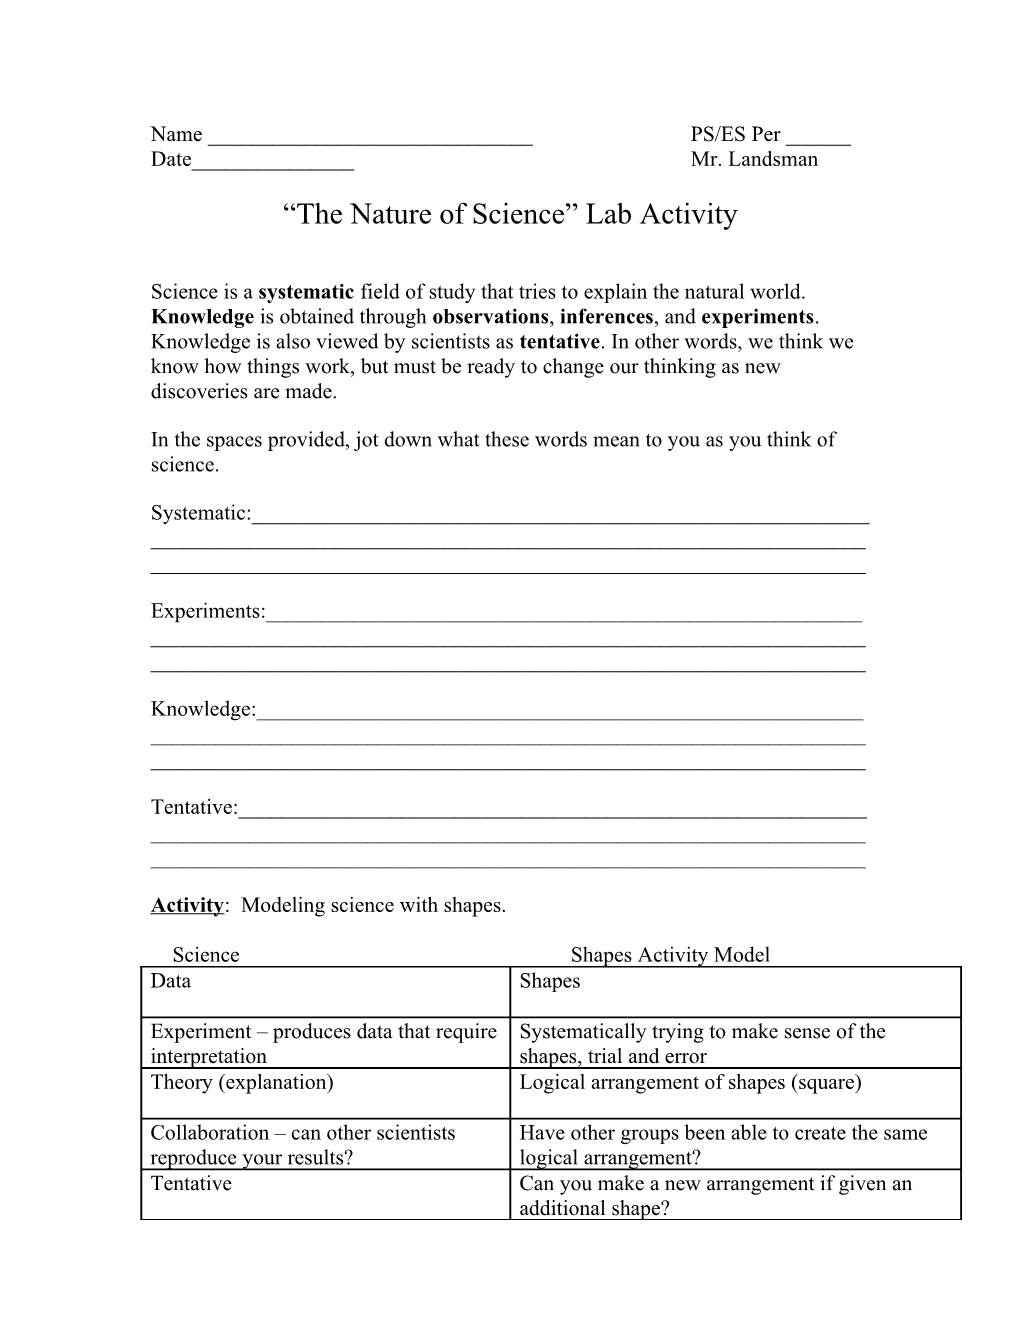 The Nature of Science Lab Activity